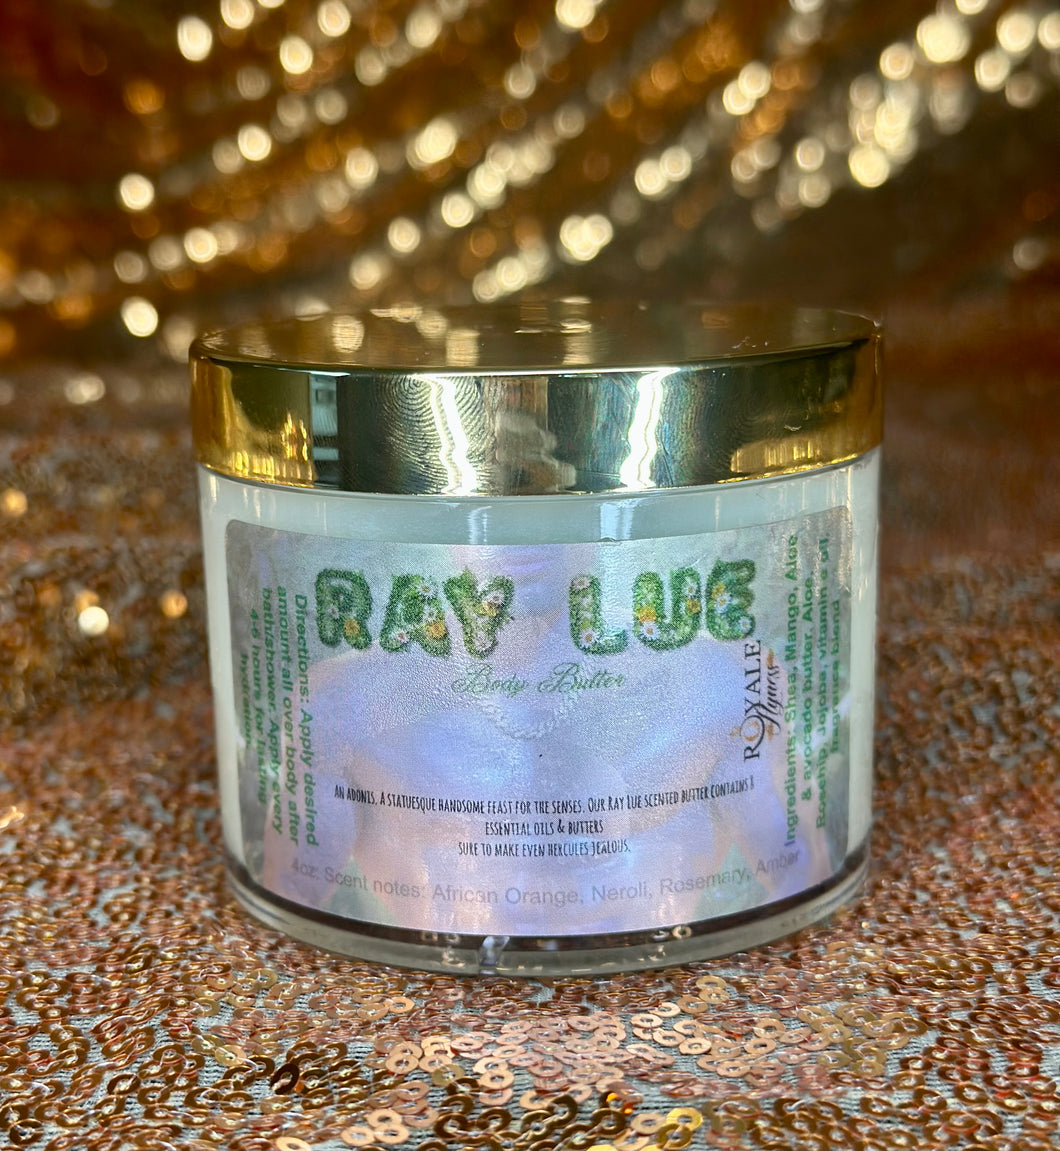 Royale Flyness “Ray Lue” premium body butter